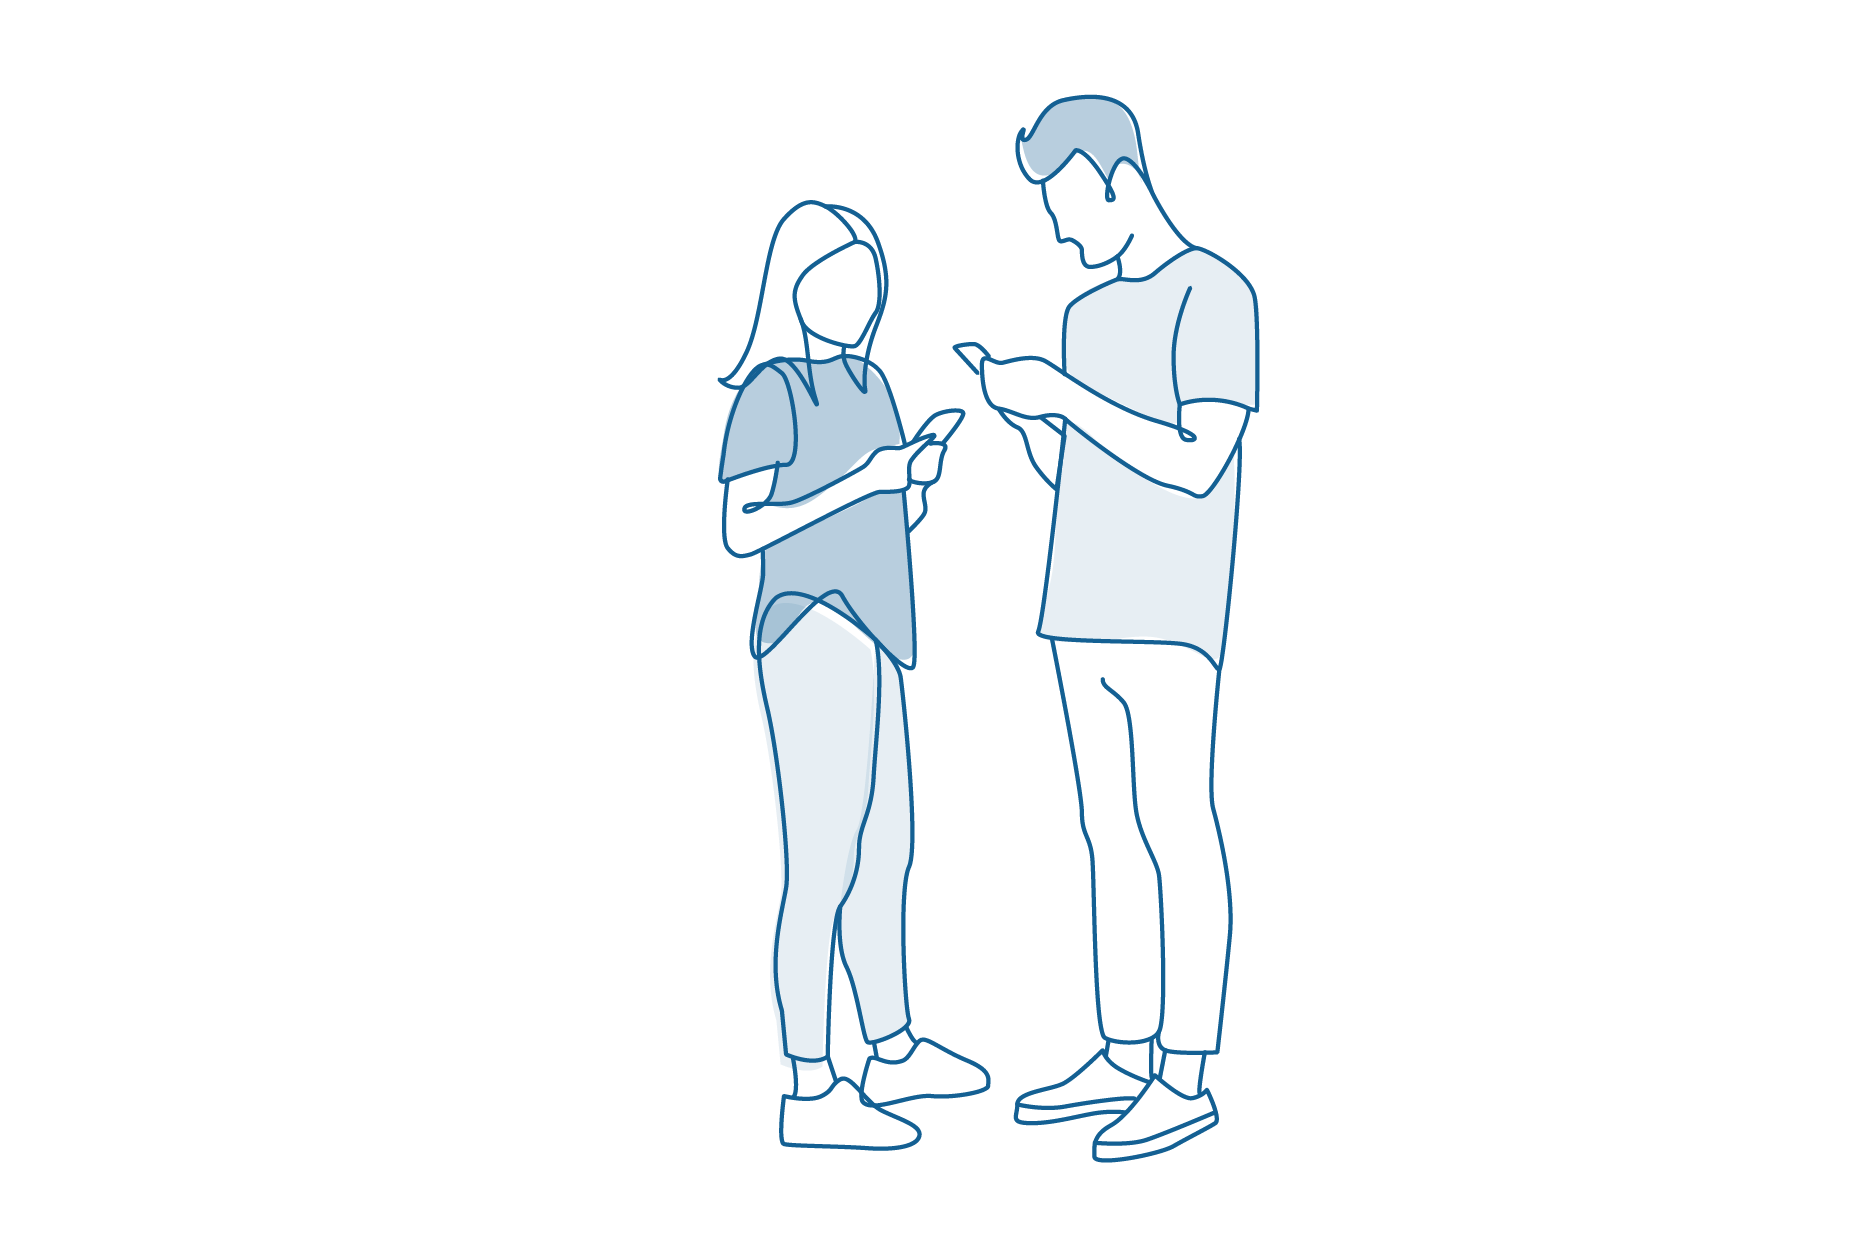 Line drawing of man and woman holding phones.